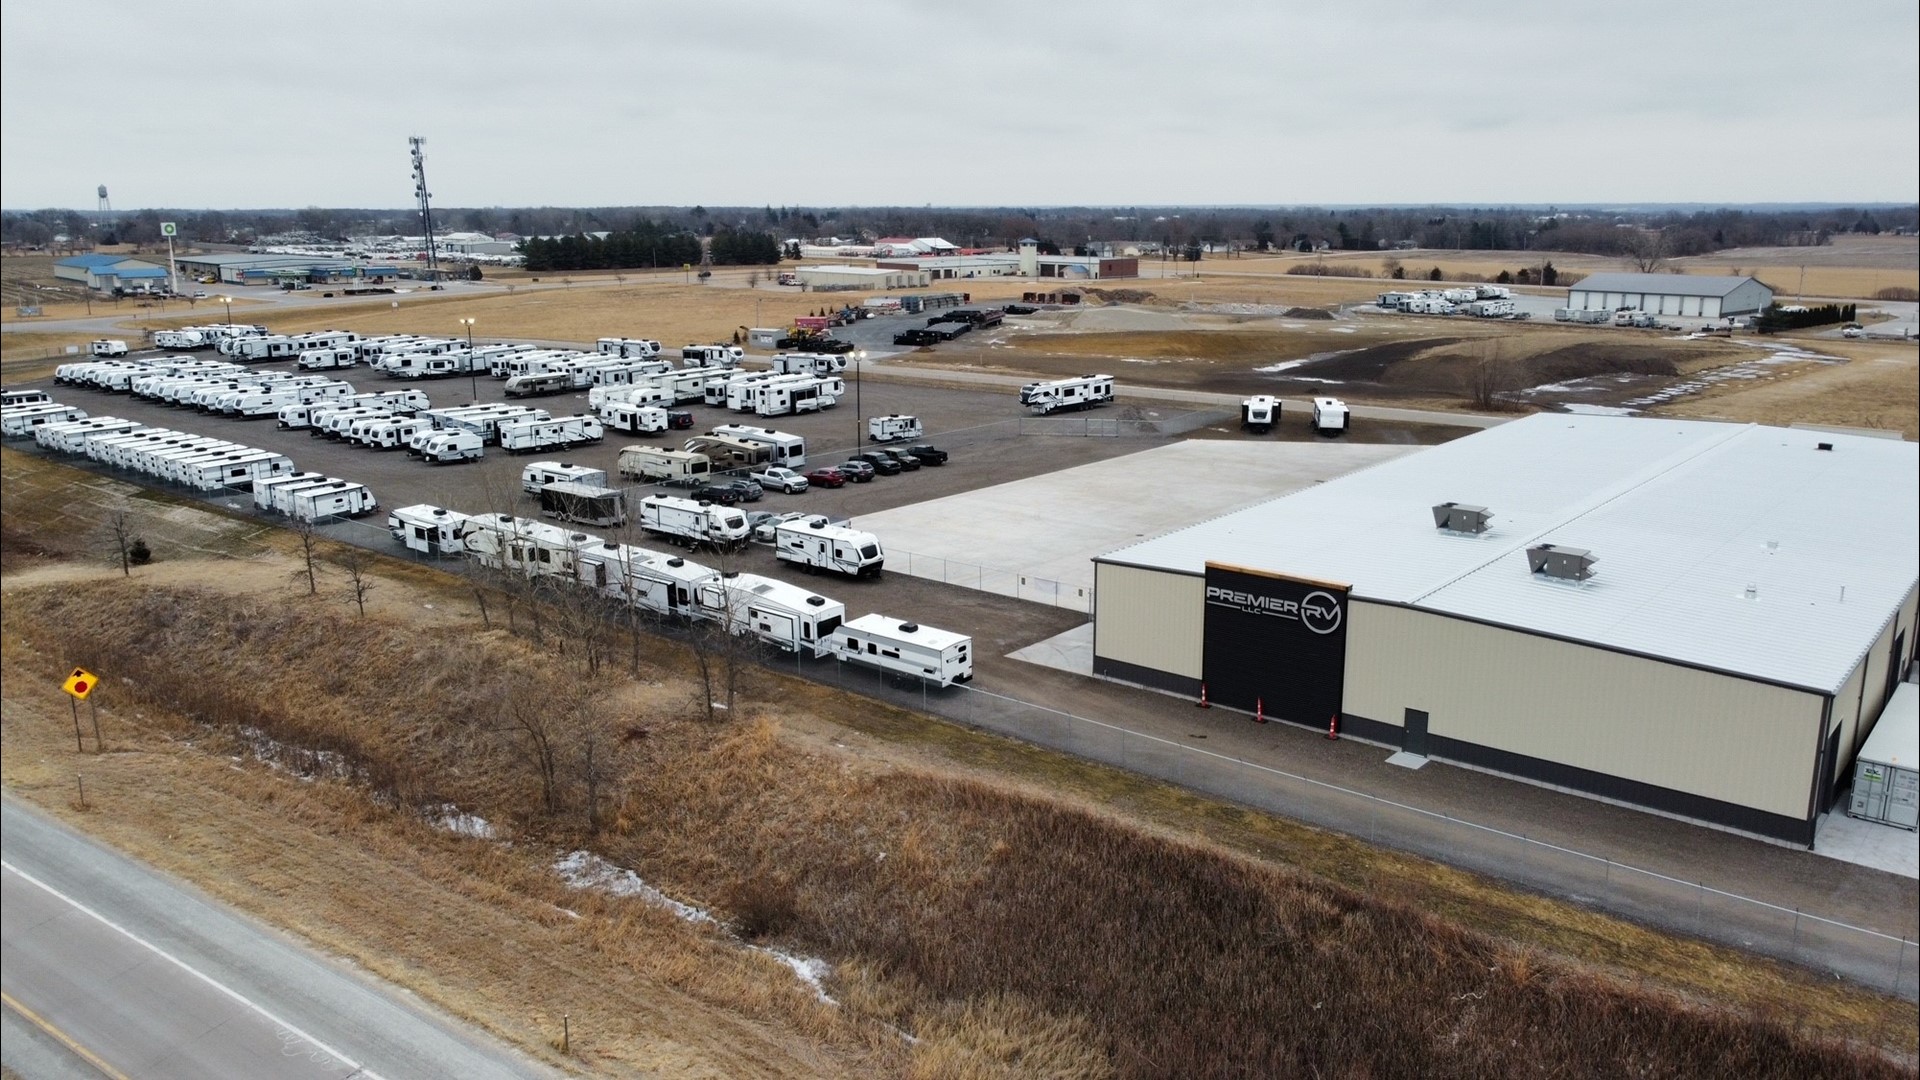 Premier RV is now open as construction on its 25,000 square foot building wraps up.